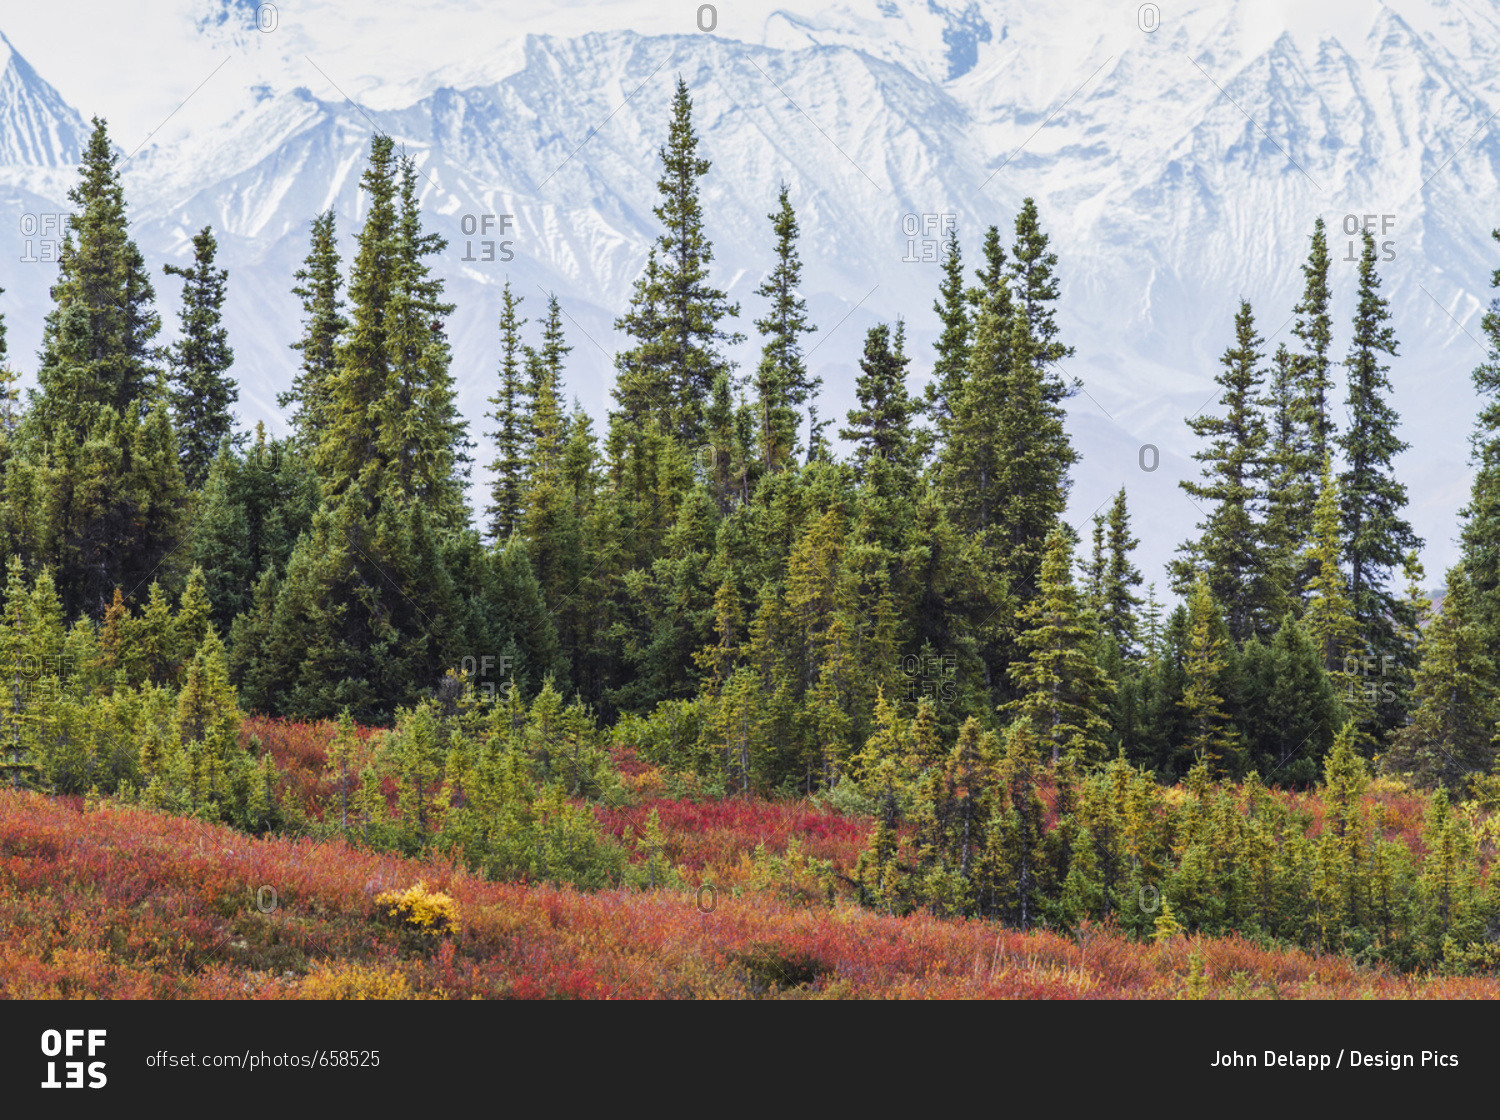 Taiga (Boreal) Forest And Tundra Near Wonder Lake In Denali National Park, Interior Alaska, With The Snow-Covered Mountains Of The Alaska Range Near The Base Of Mt. McKinley In The Background. Fall.